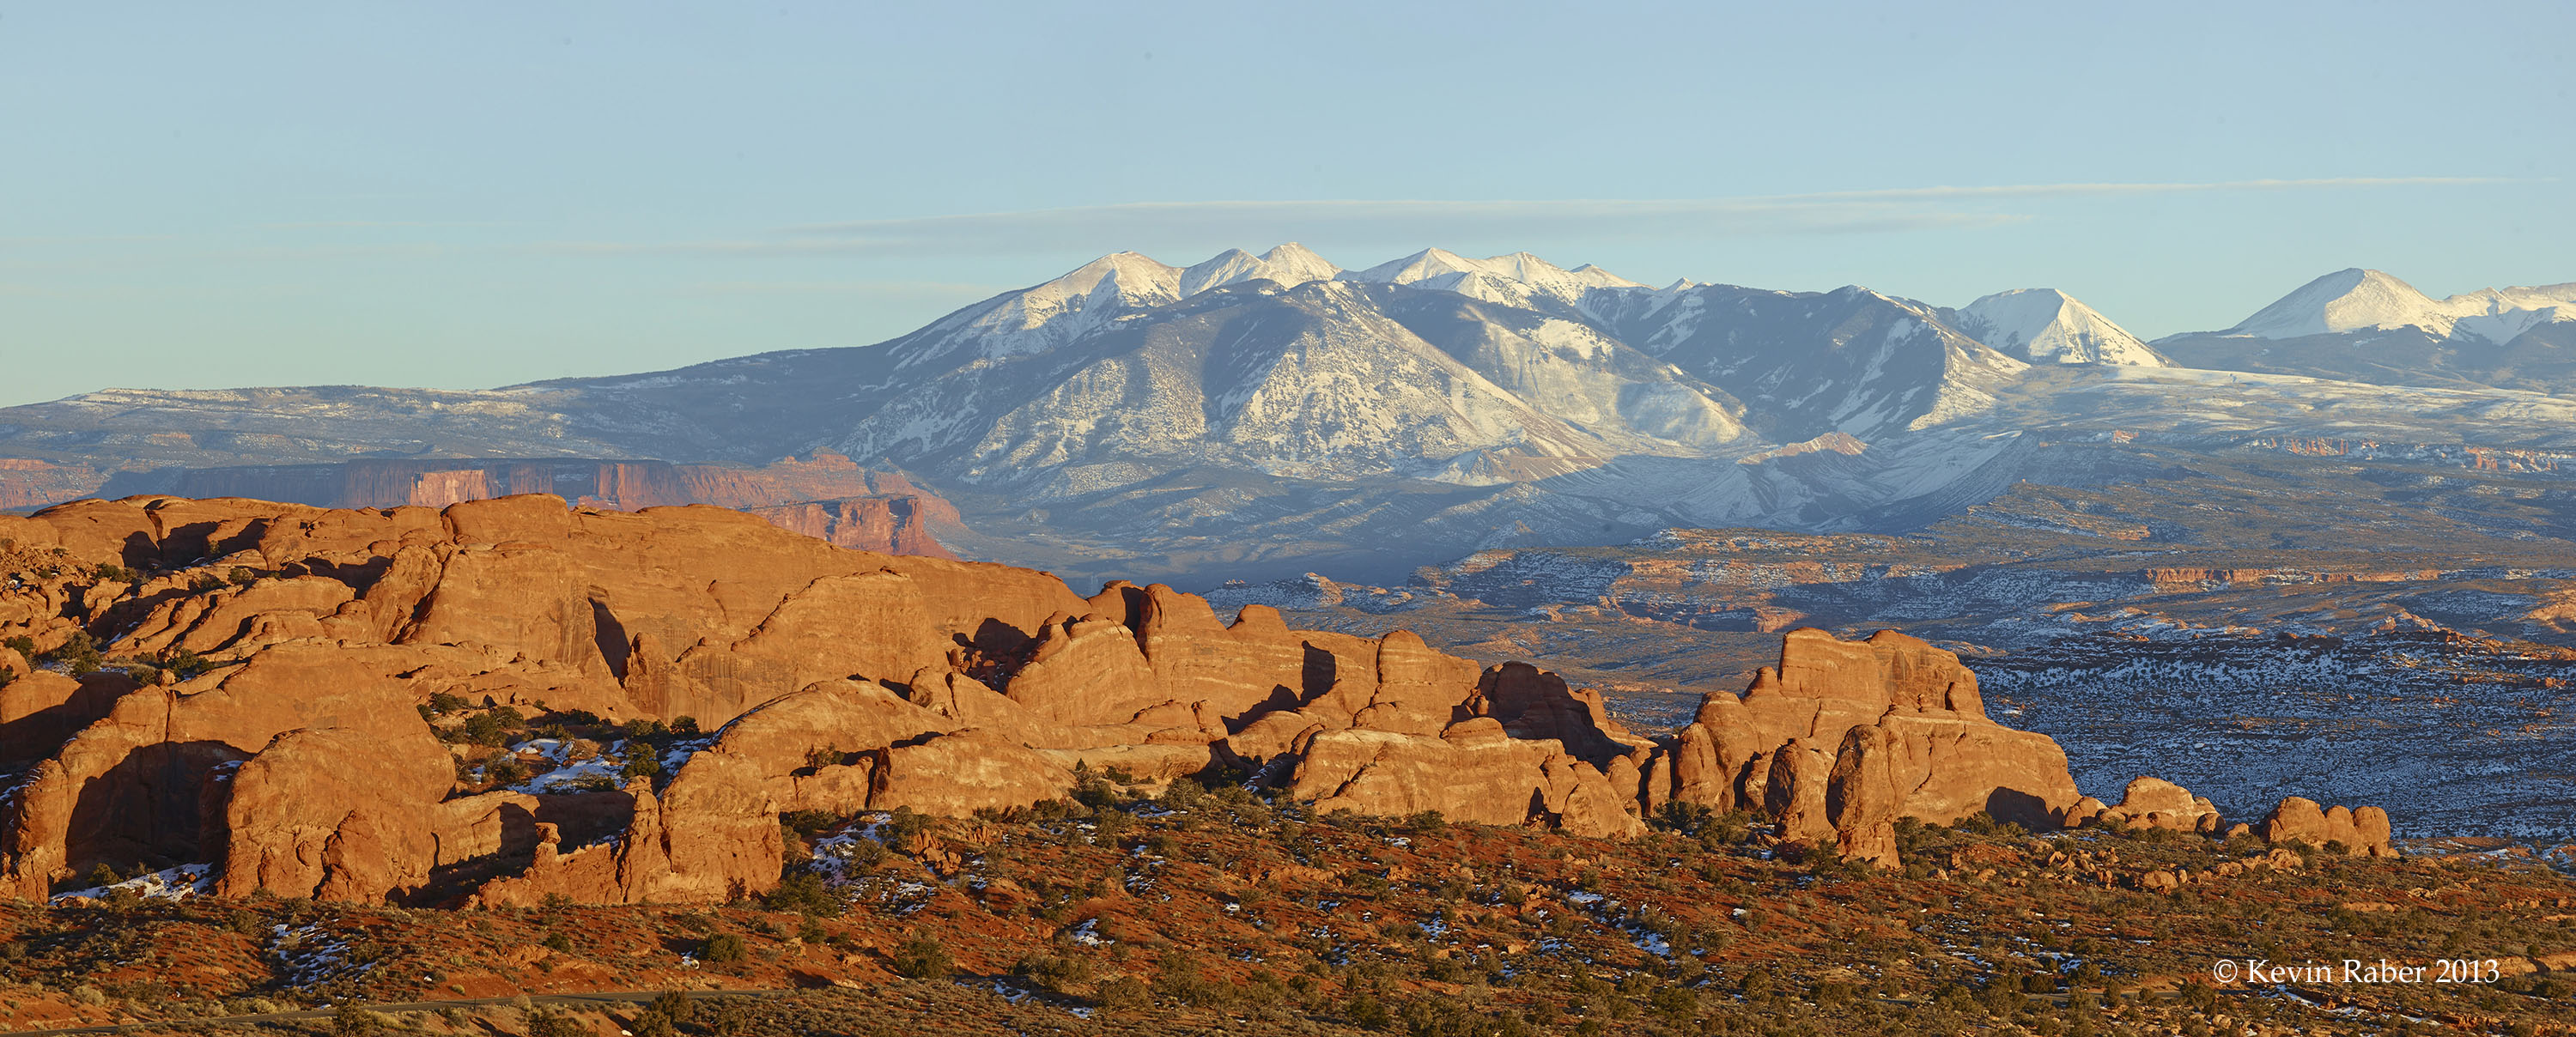 3 stitch pano in Arches NP, shot with a Phase One IQ180 and 240mm lens